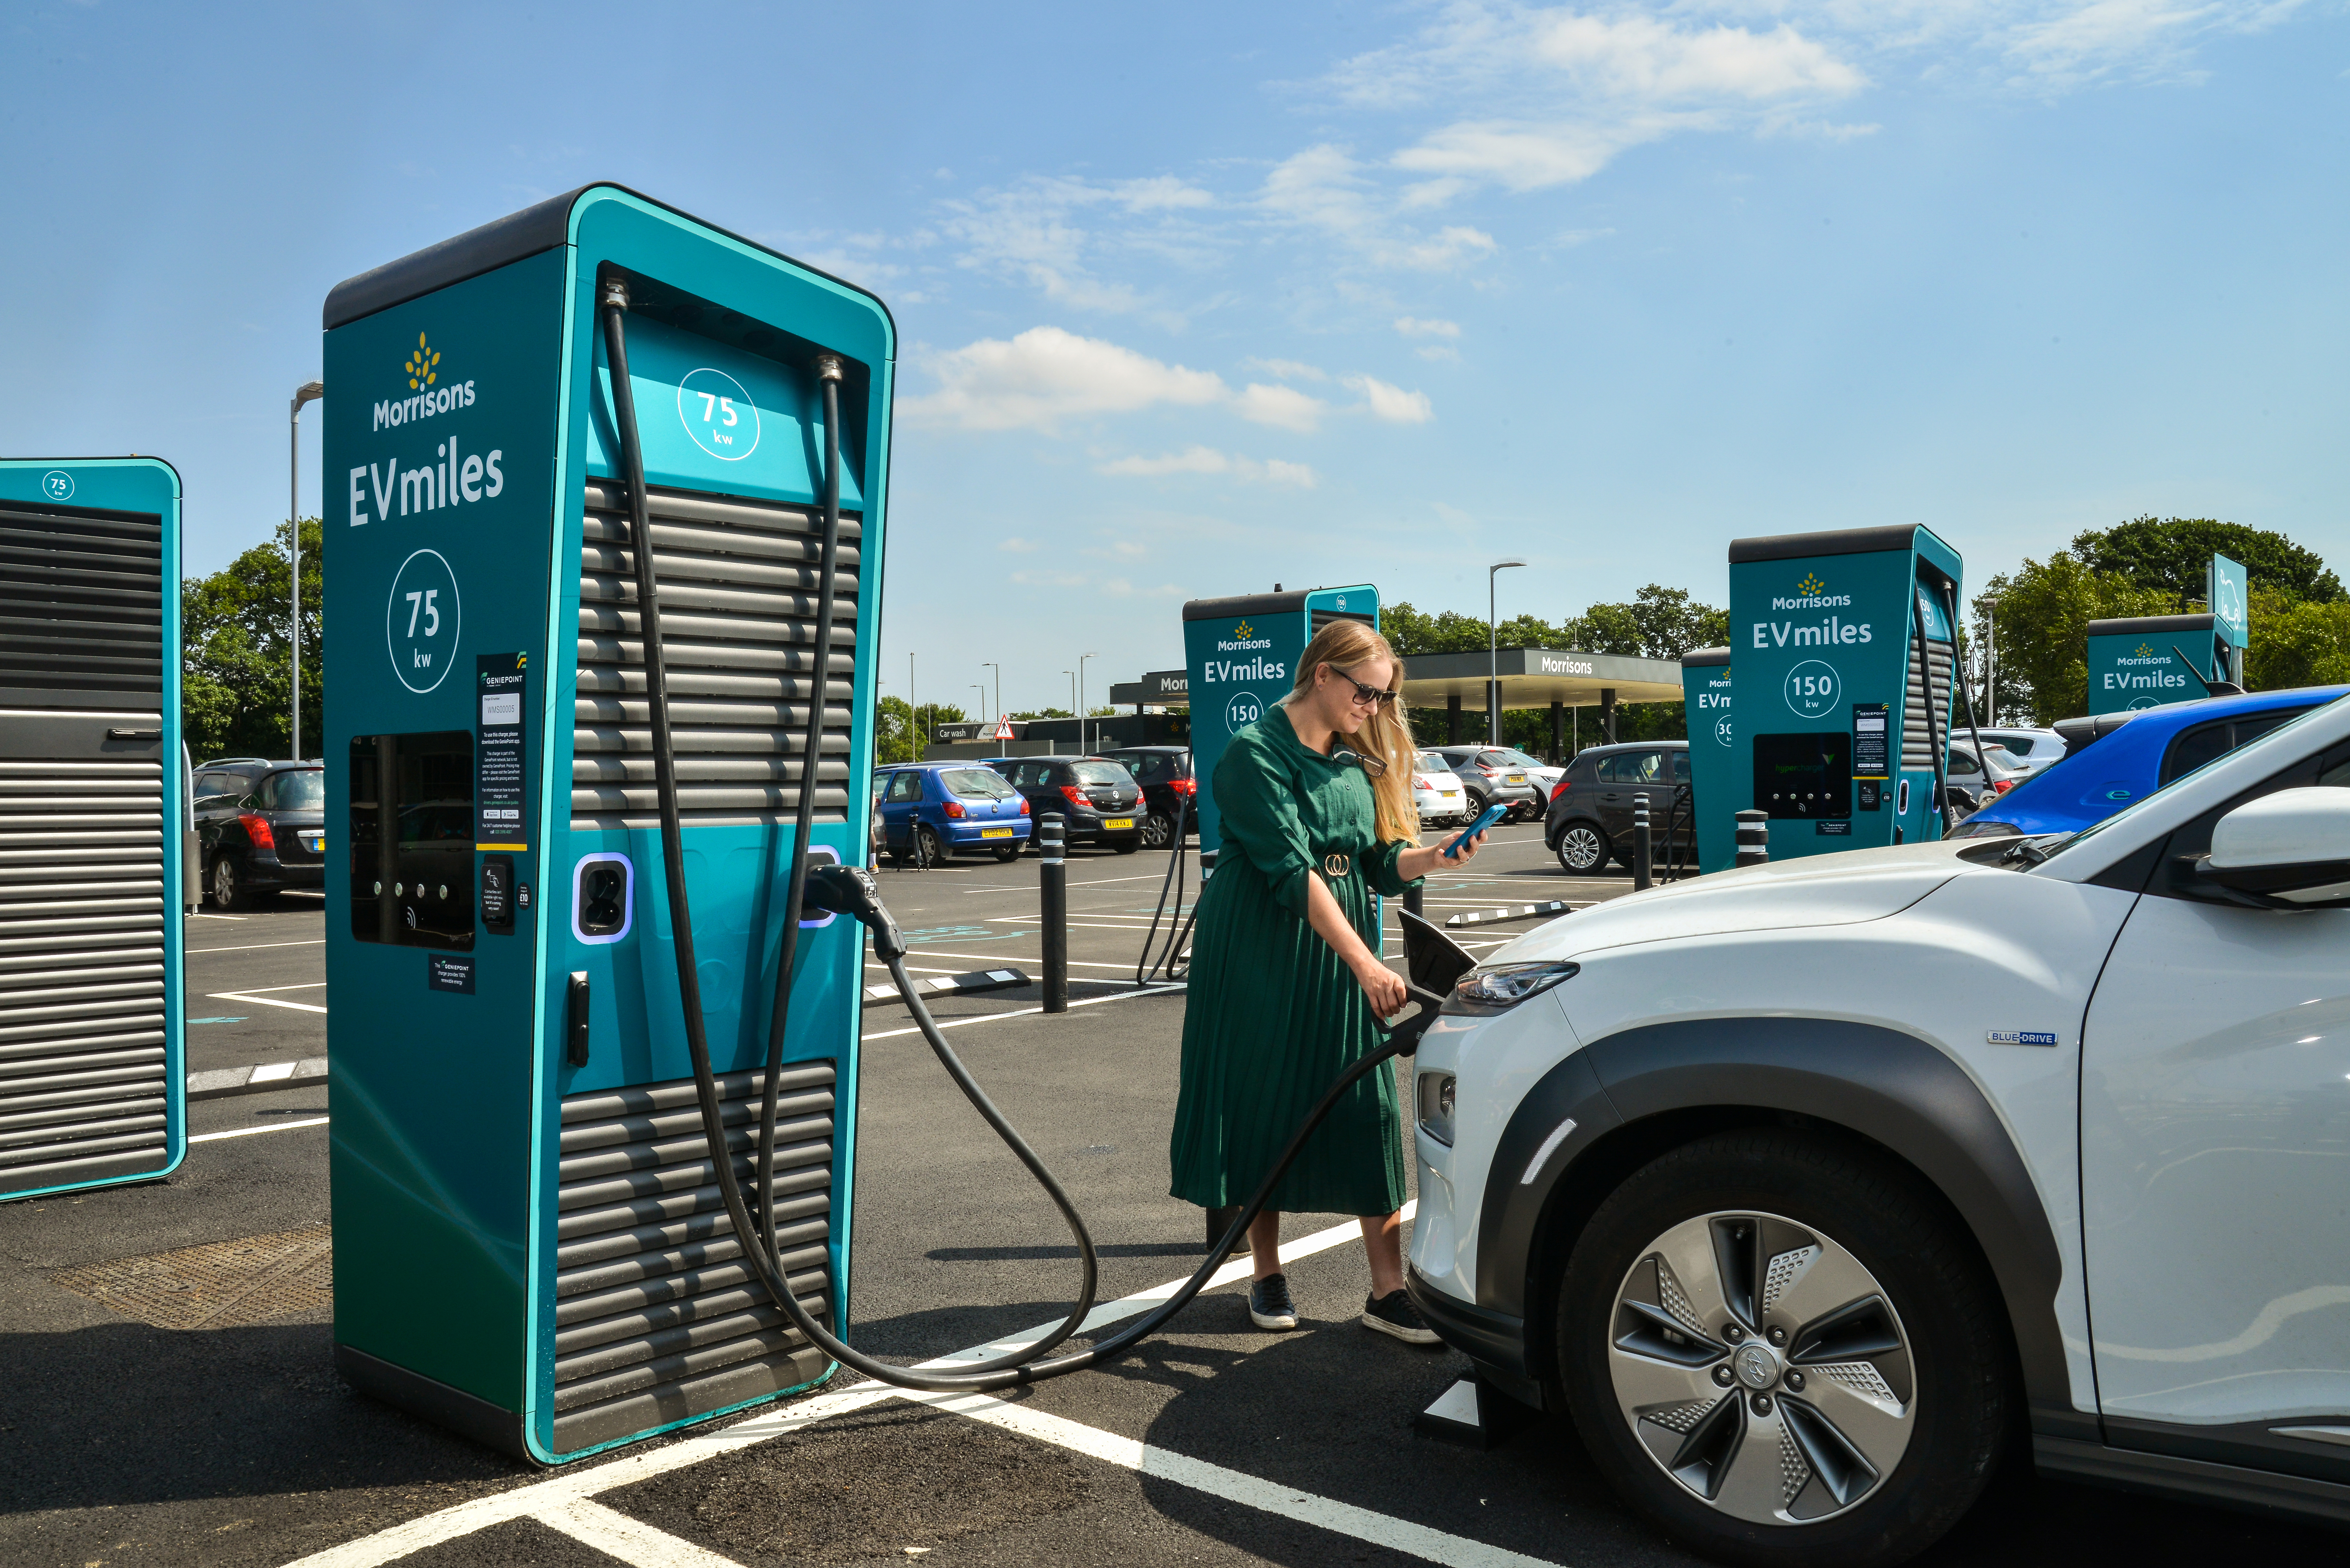 GeniePoint charger is 10,000th high-powered device in UK